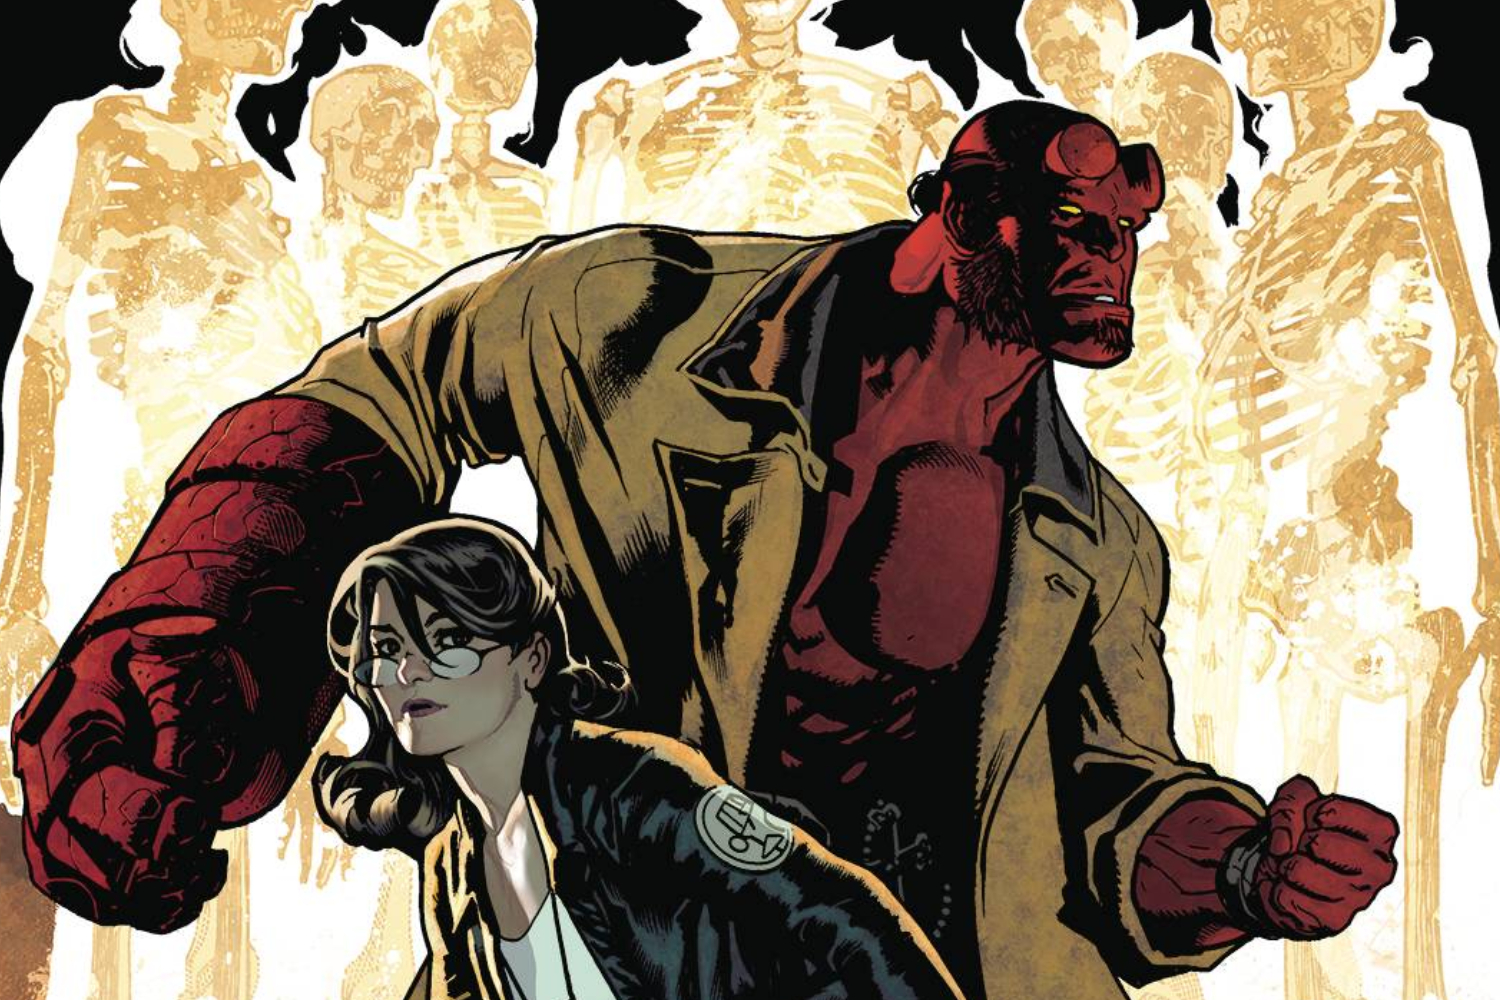 Artist Adam Hughes on ‘Hellboy and the B.P.R.D.: The Seven Wives Club' and being scared